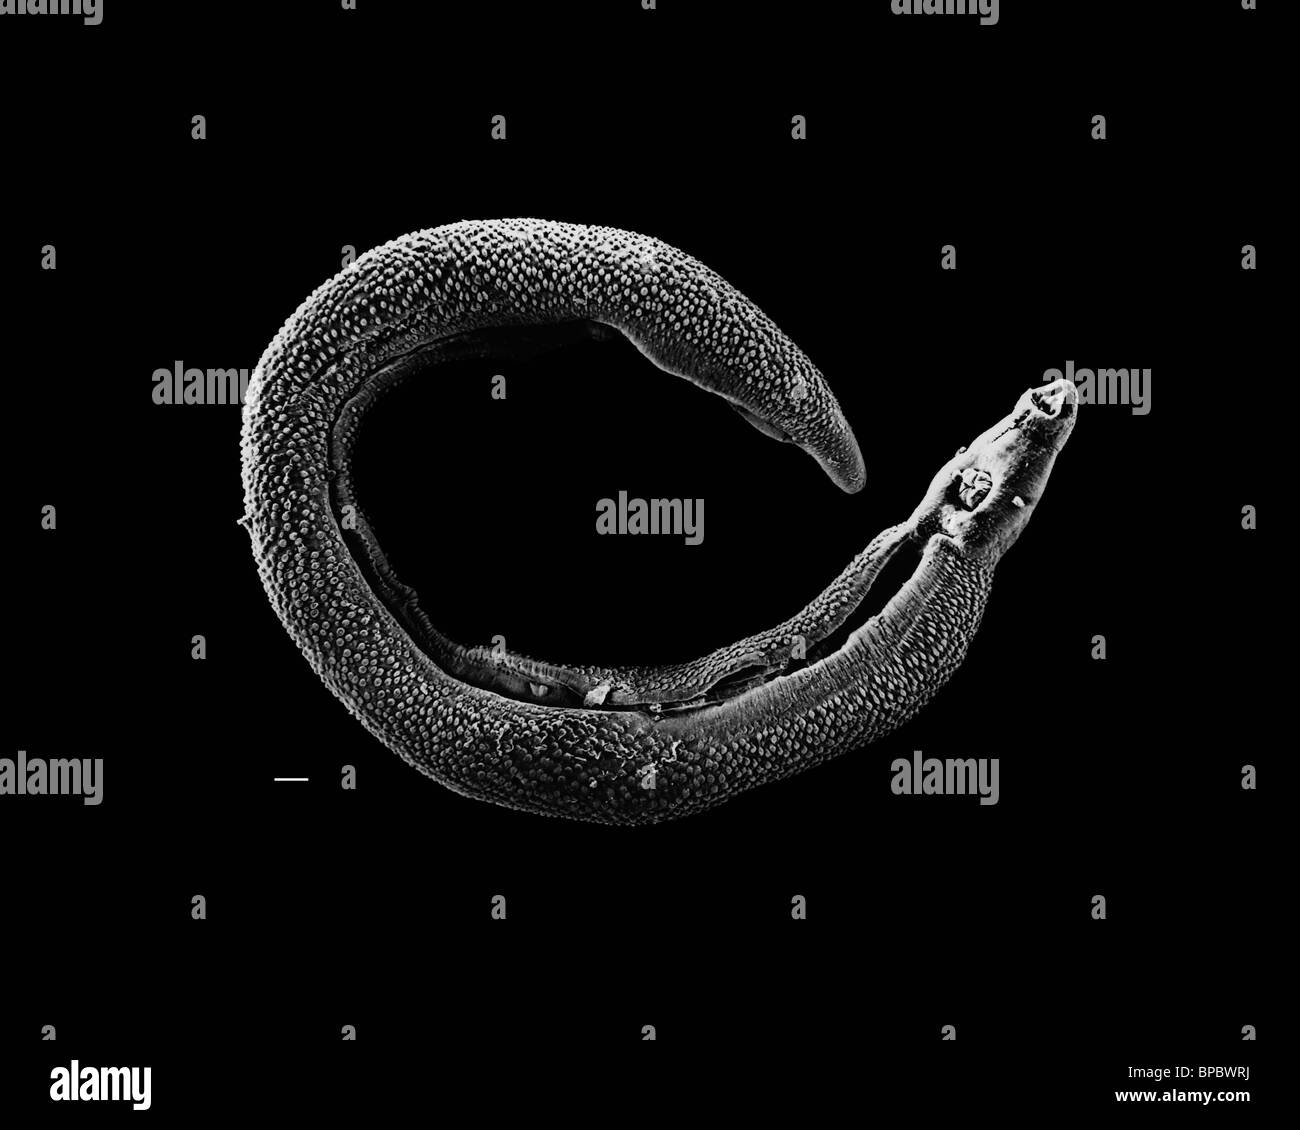 Electron micrograph of an adult male Schistosoma parasite worm Stock Photo